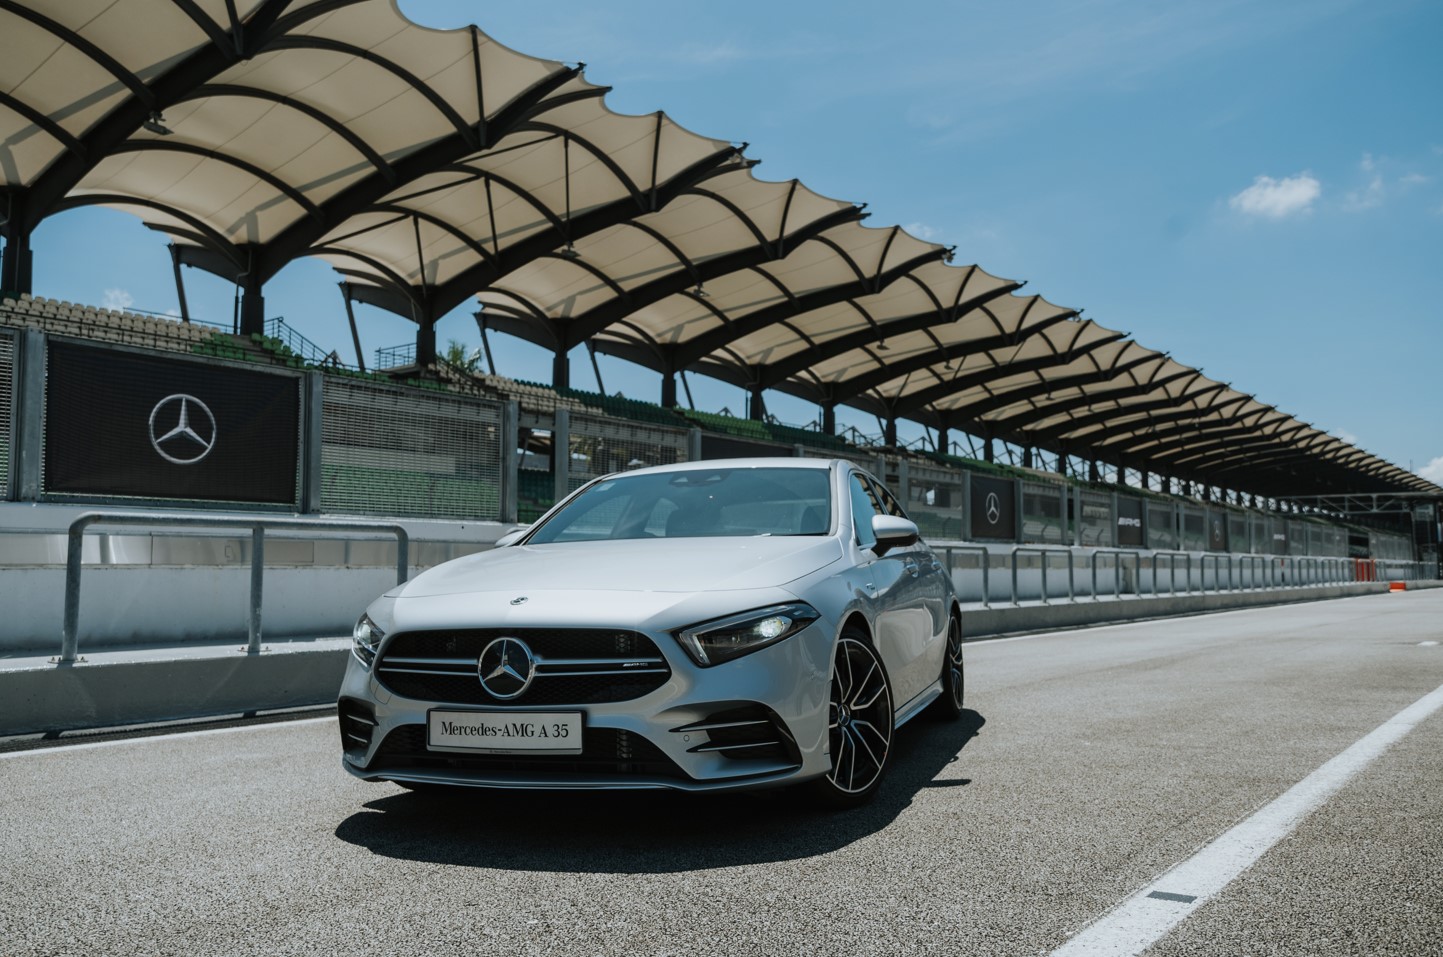 Mercedes-Benz have officially launched the locally assembled Mercedes-AMG A 35 4MATIC in Malaysia. It was introduced alongside the Mercedes-AMG GLA 35 4MATIC